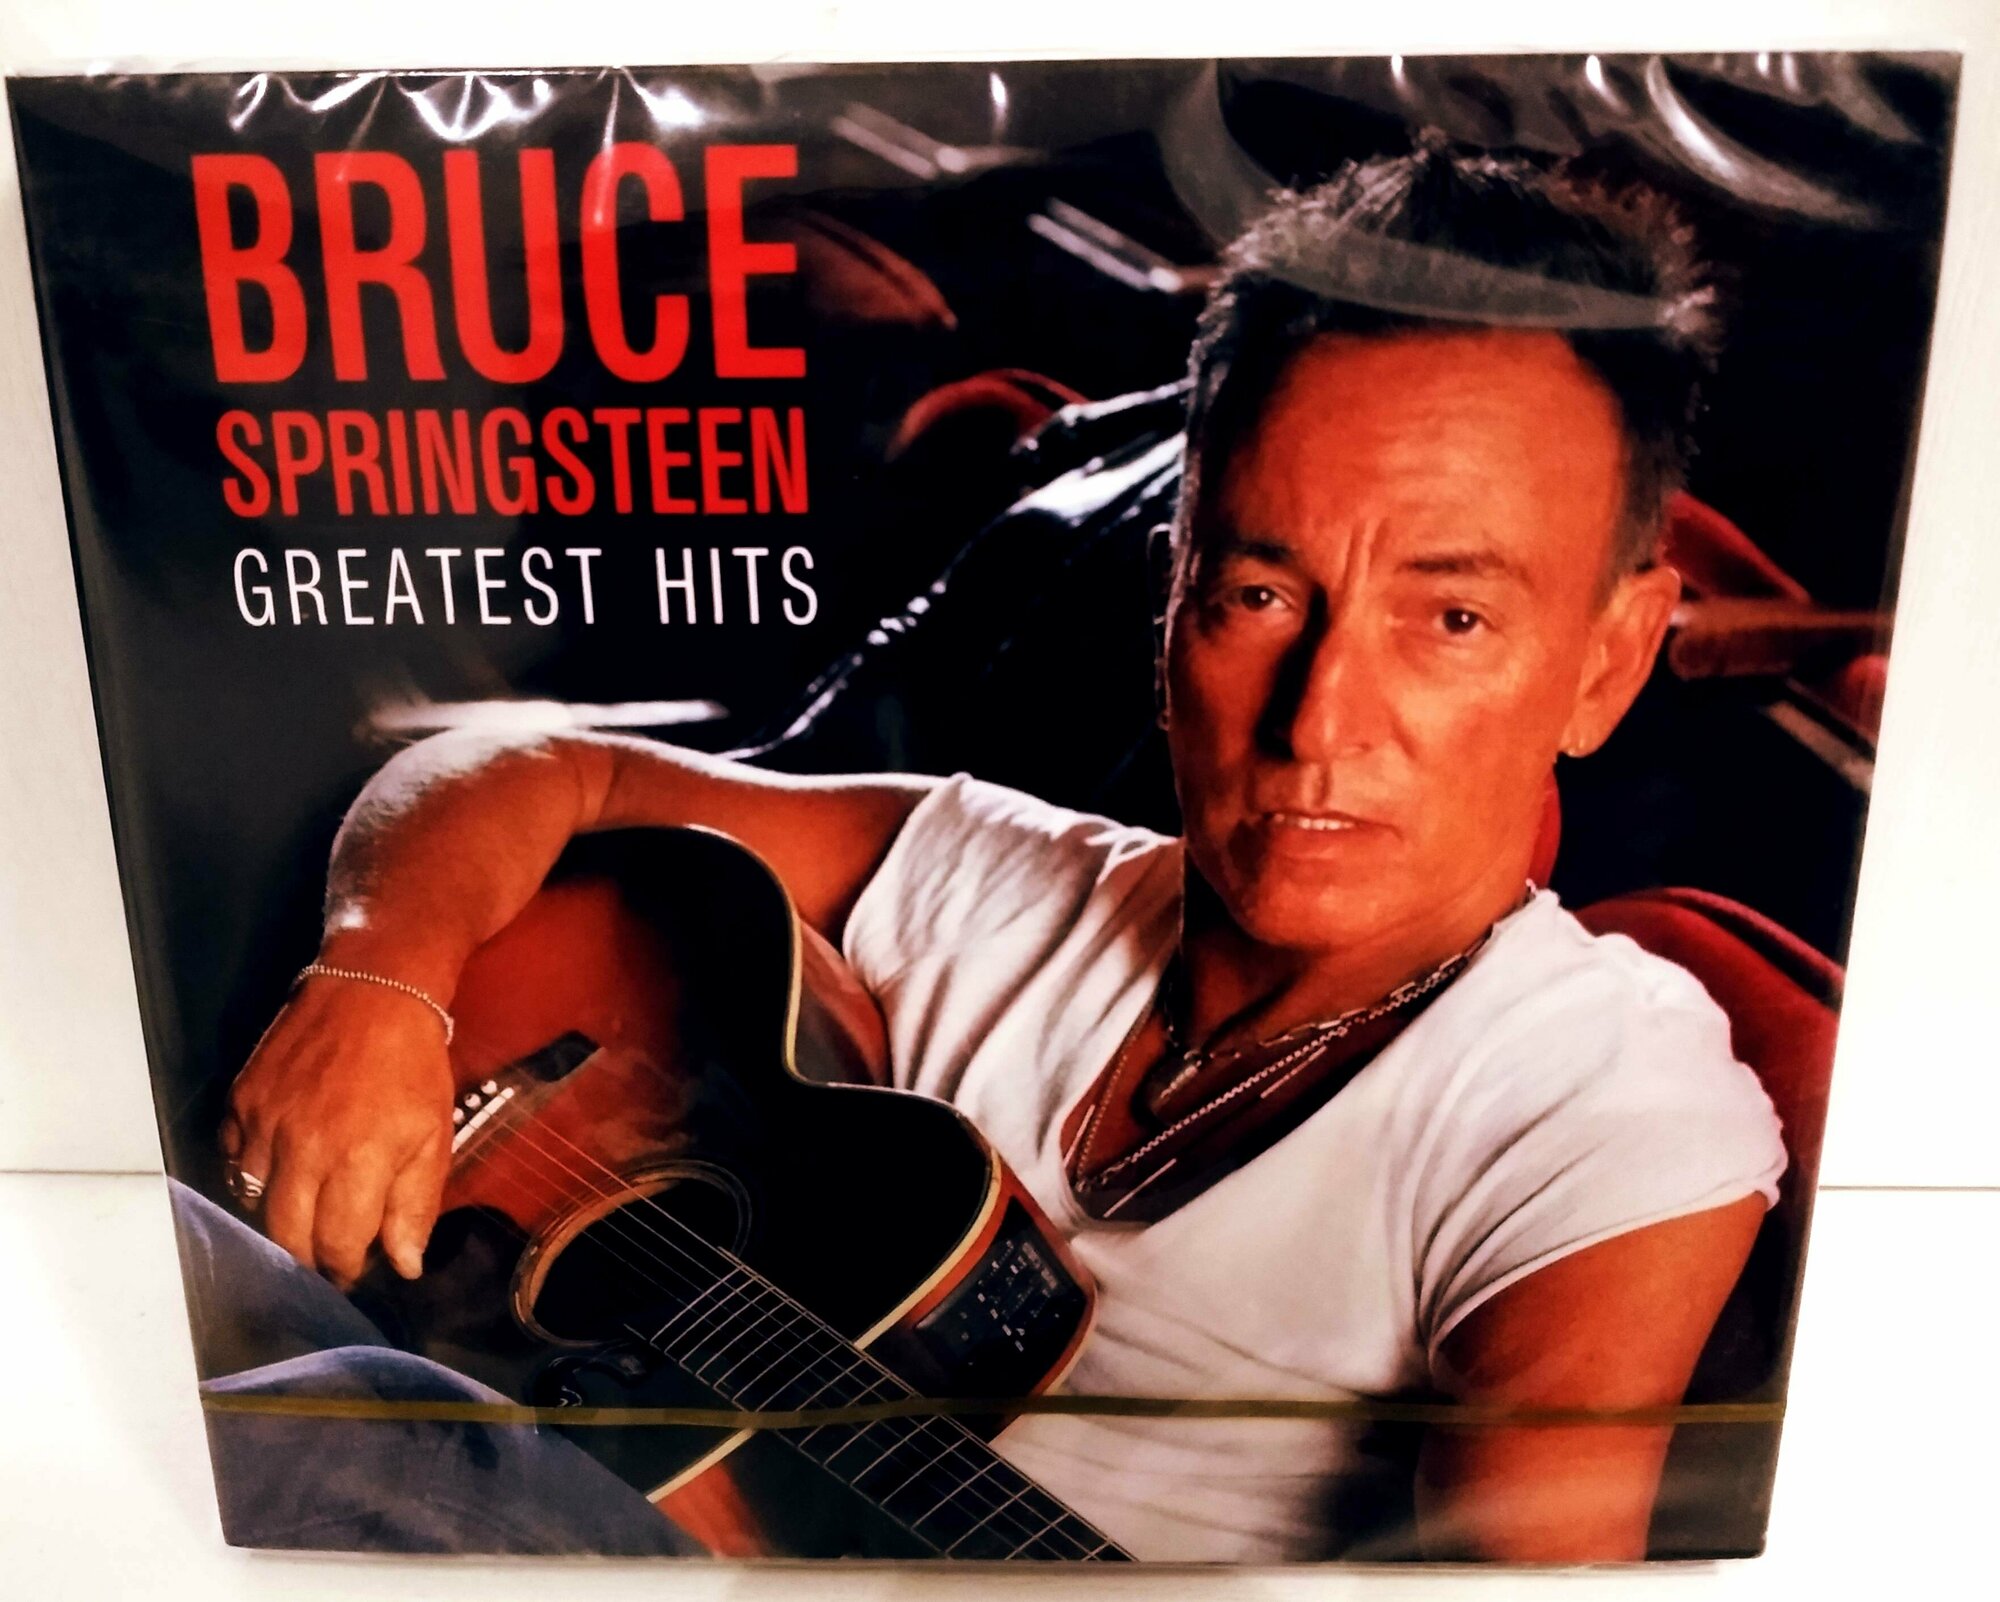 Bruce Springsteen "Greatest Hits" 2 CD